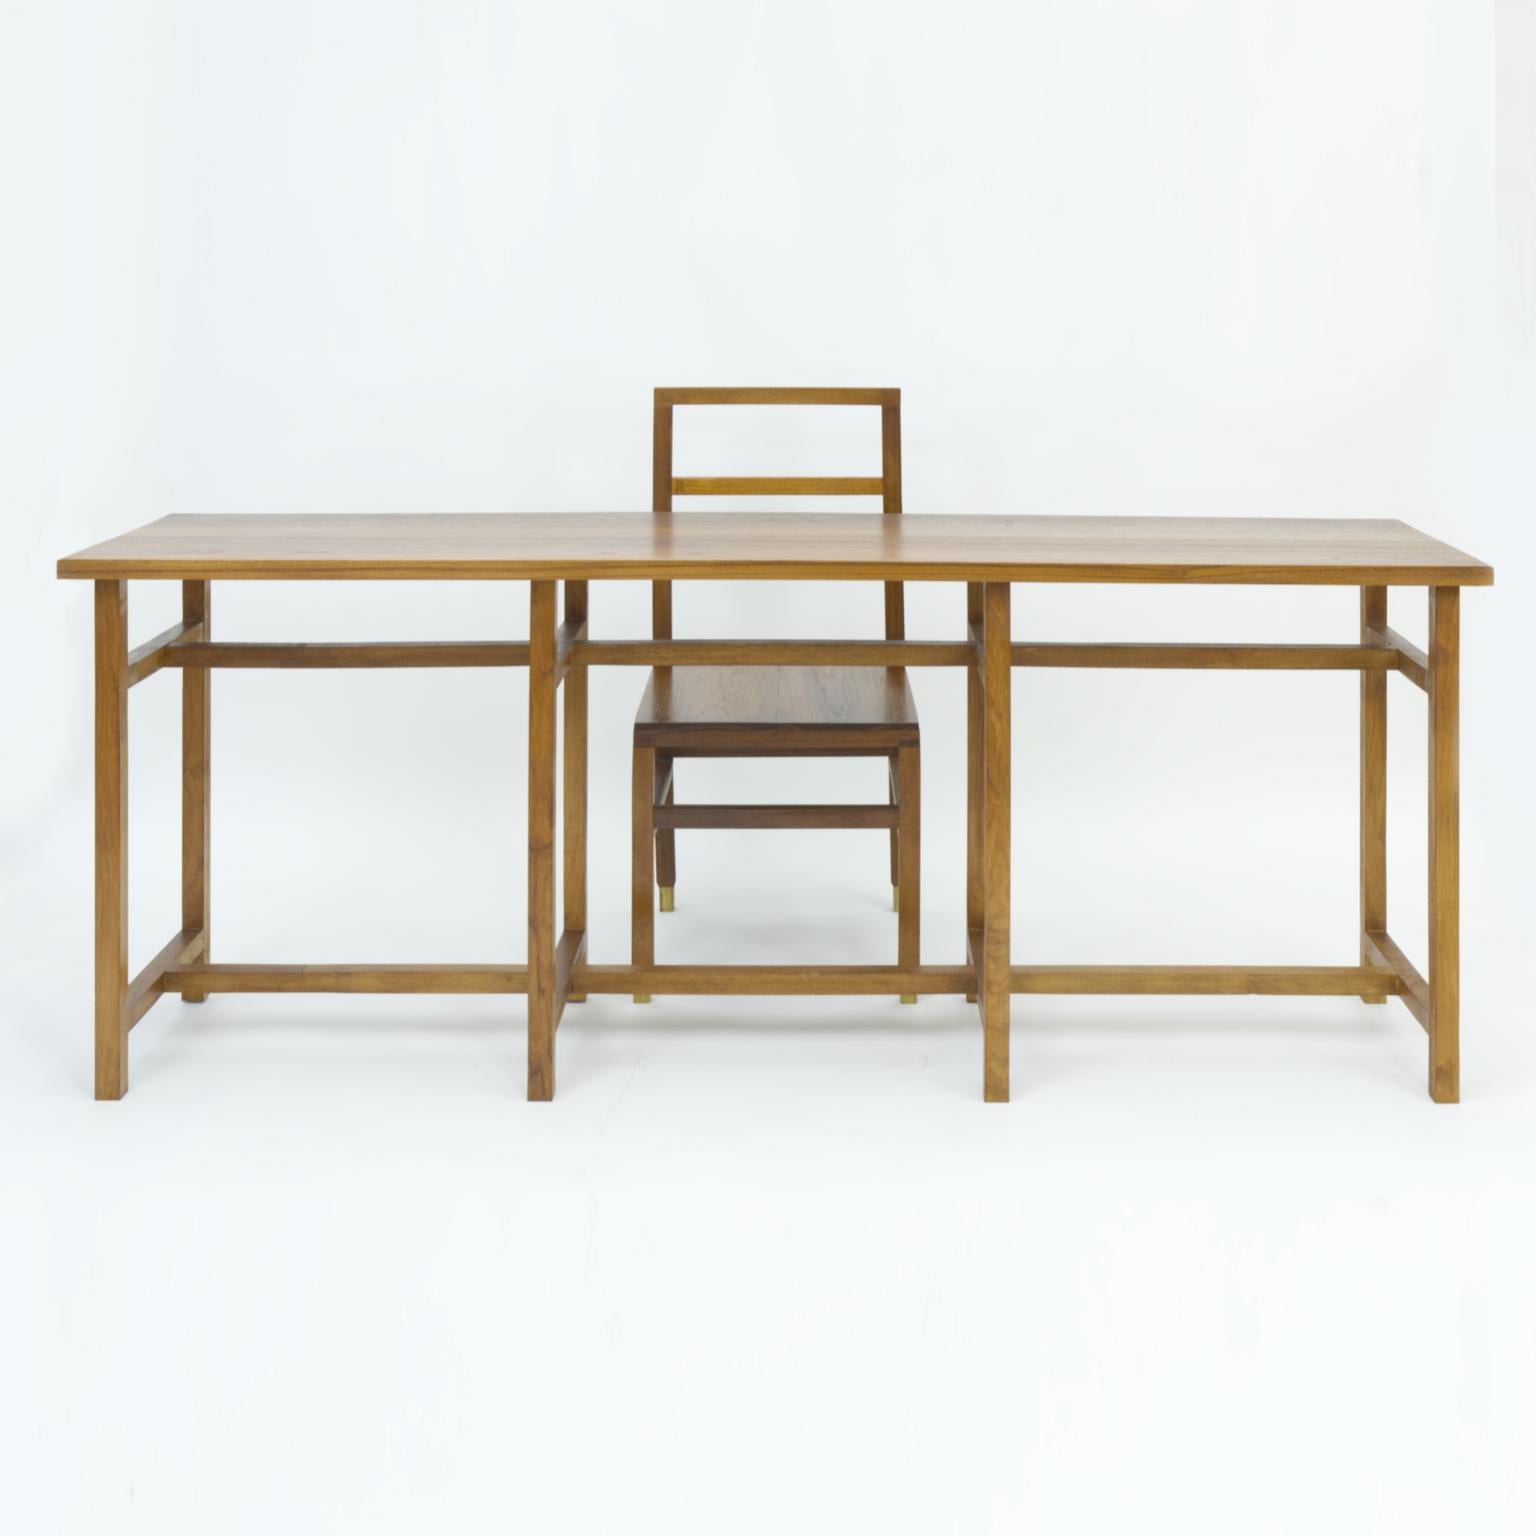 Contemporary Geometric Minimal Console Hardwood Table For Sale